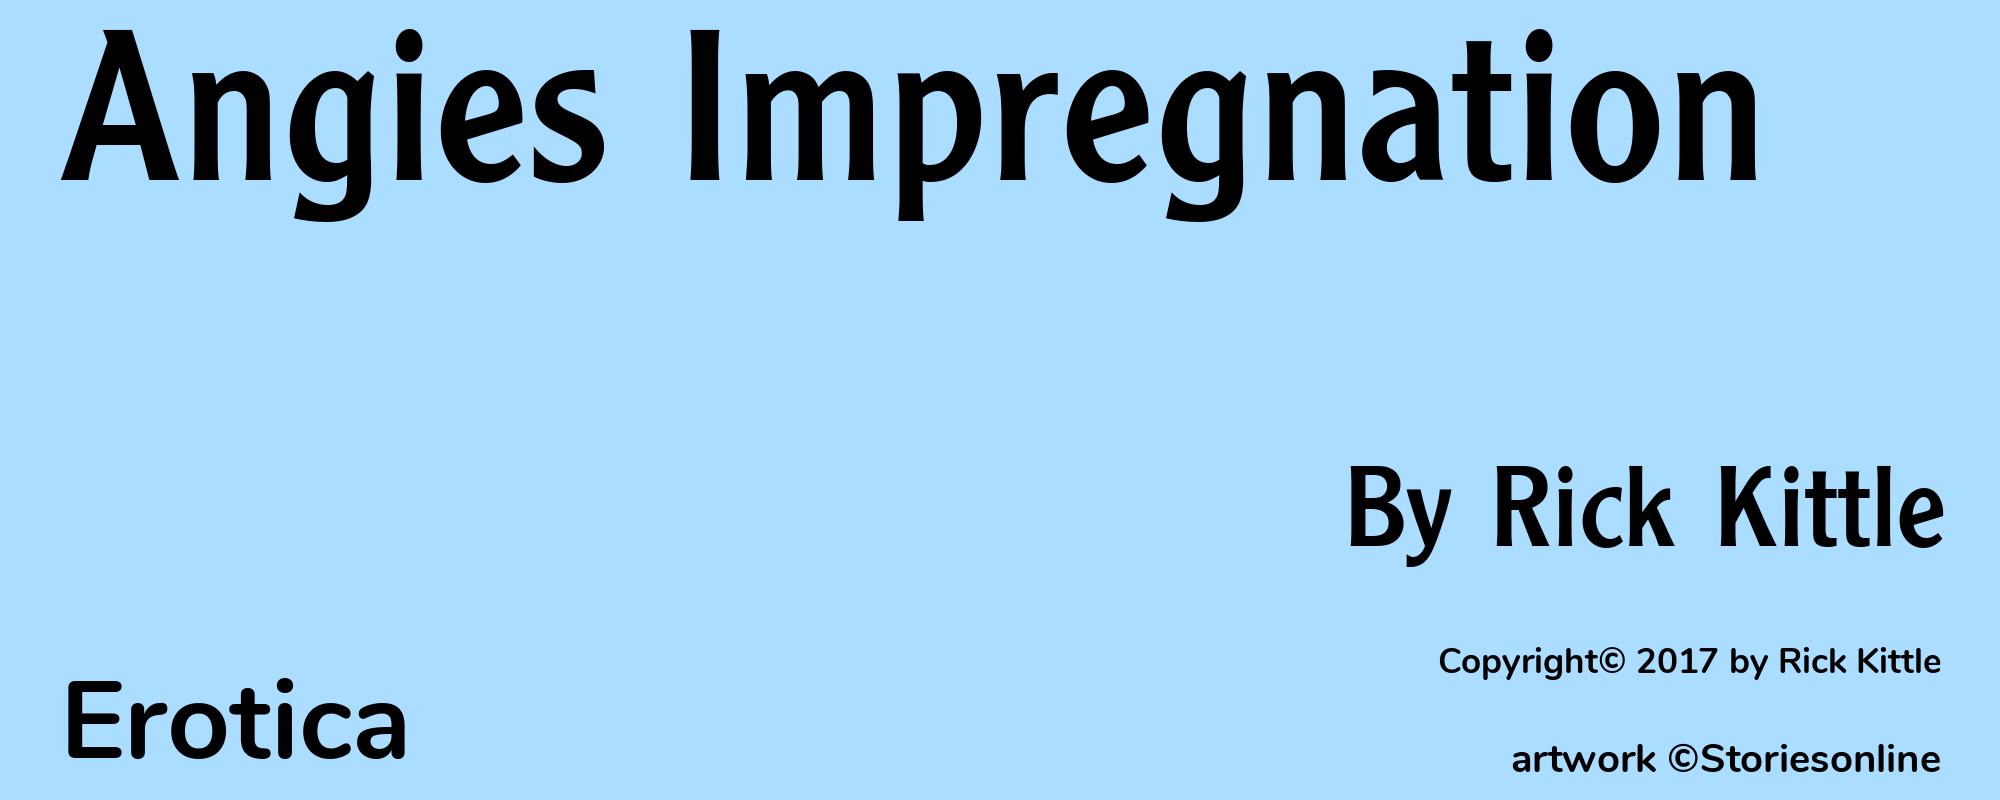 Angies Impregnation - Cover